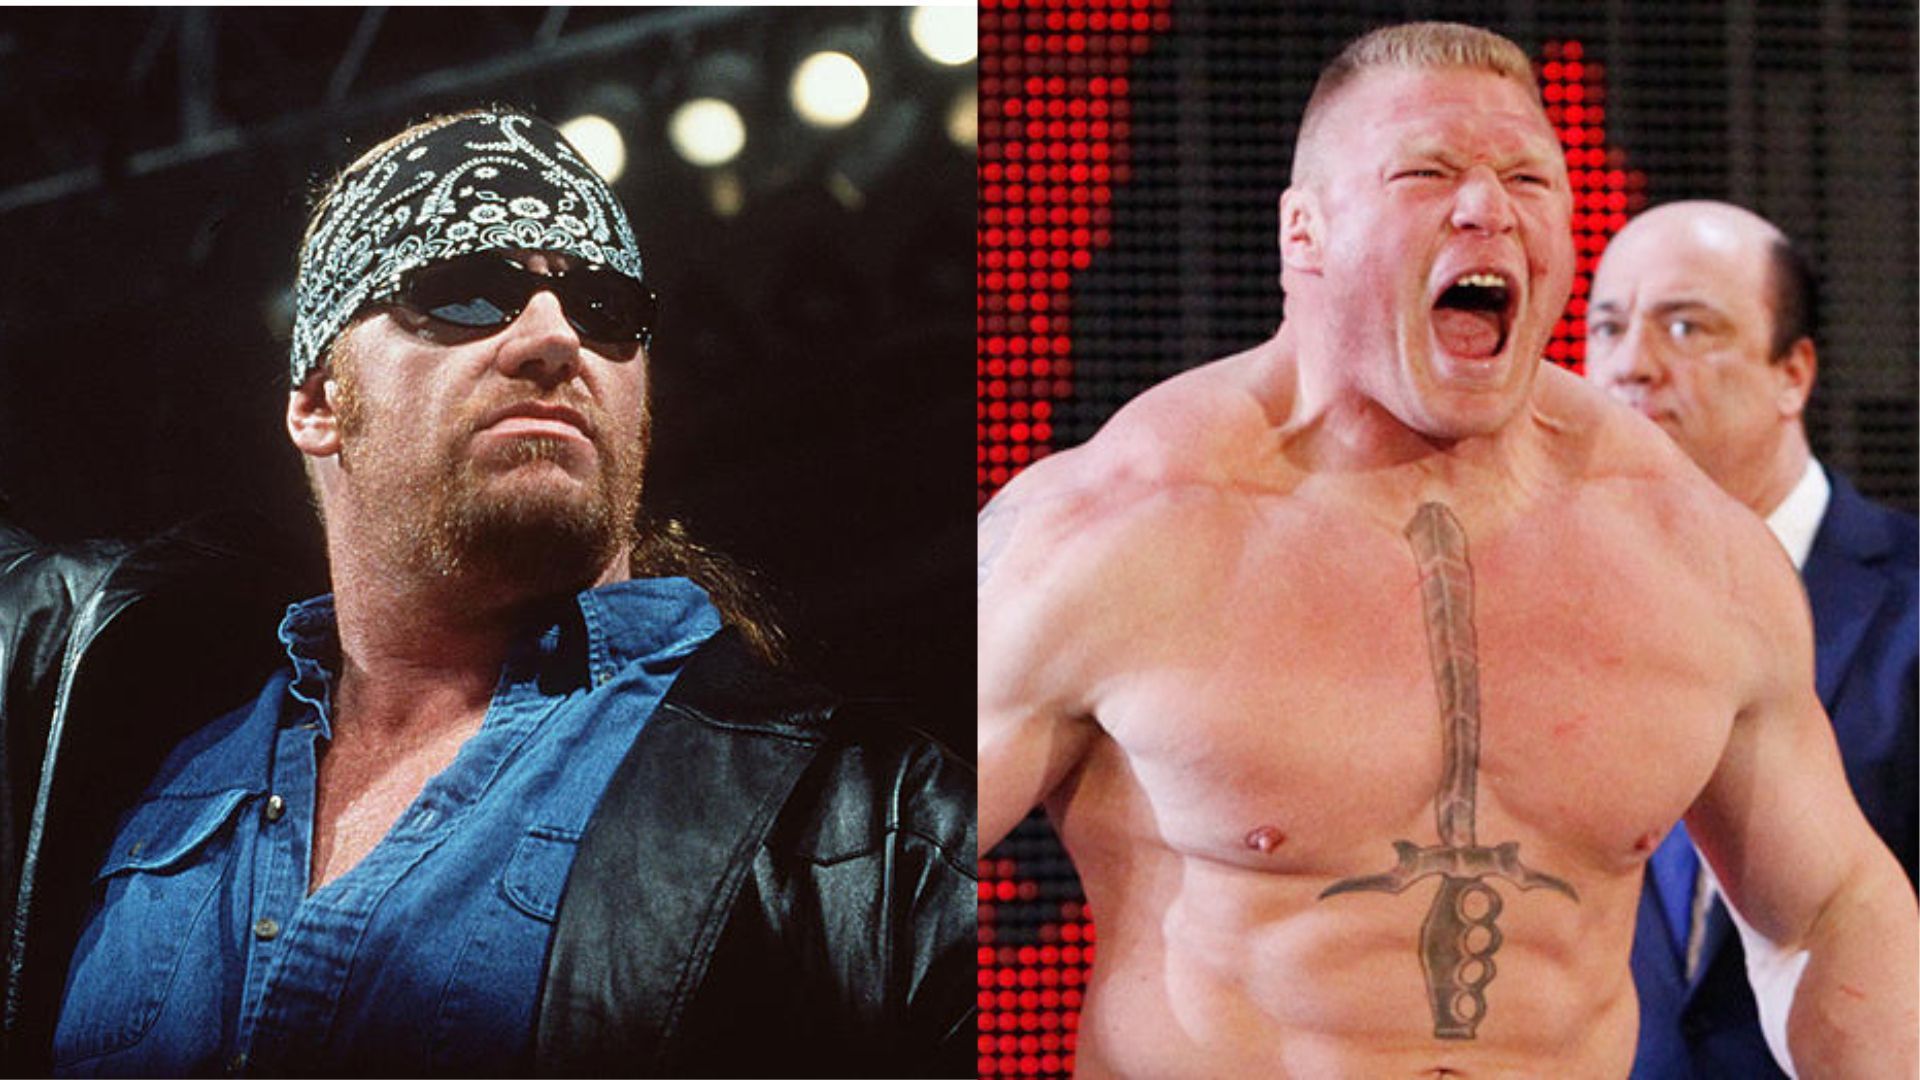 The Undertaker-Brock Lesnar saga had many unforgettable moments 